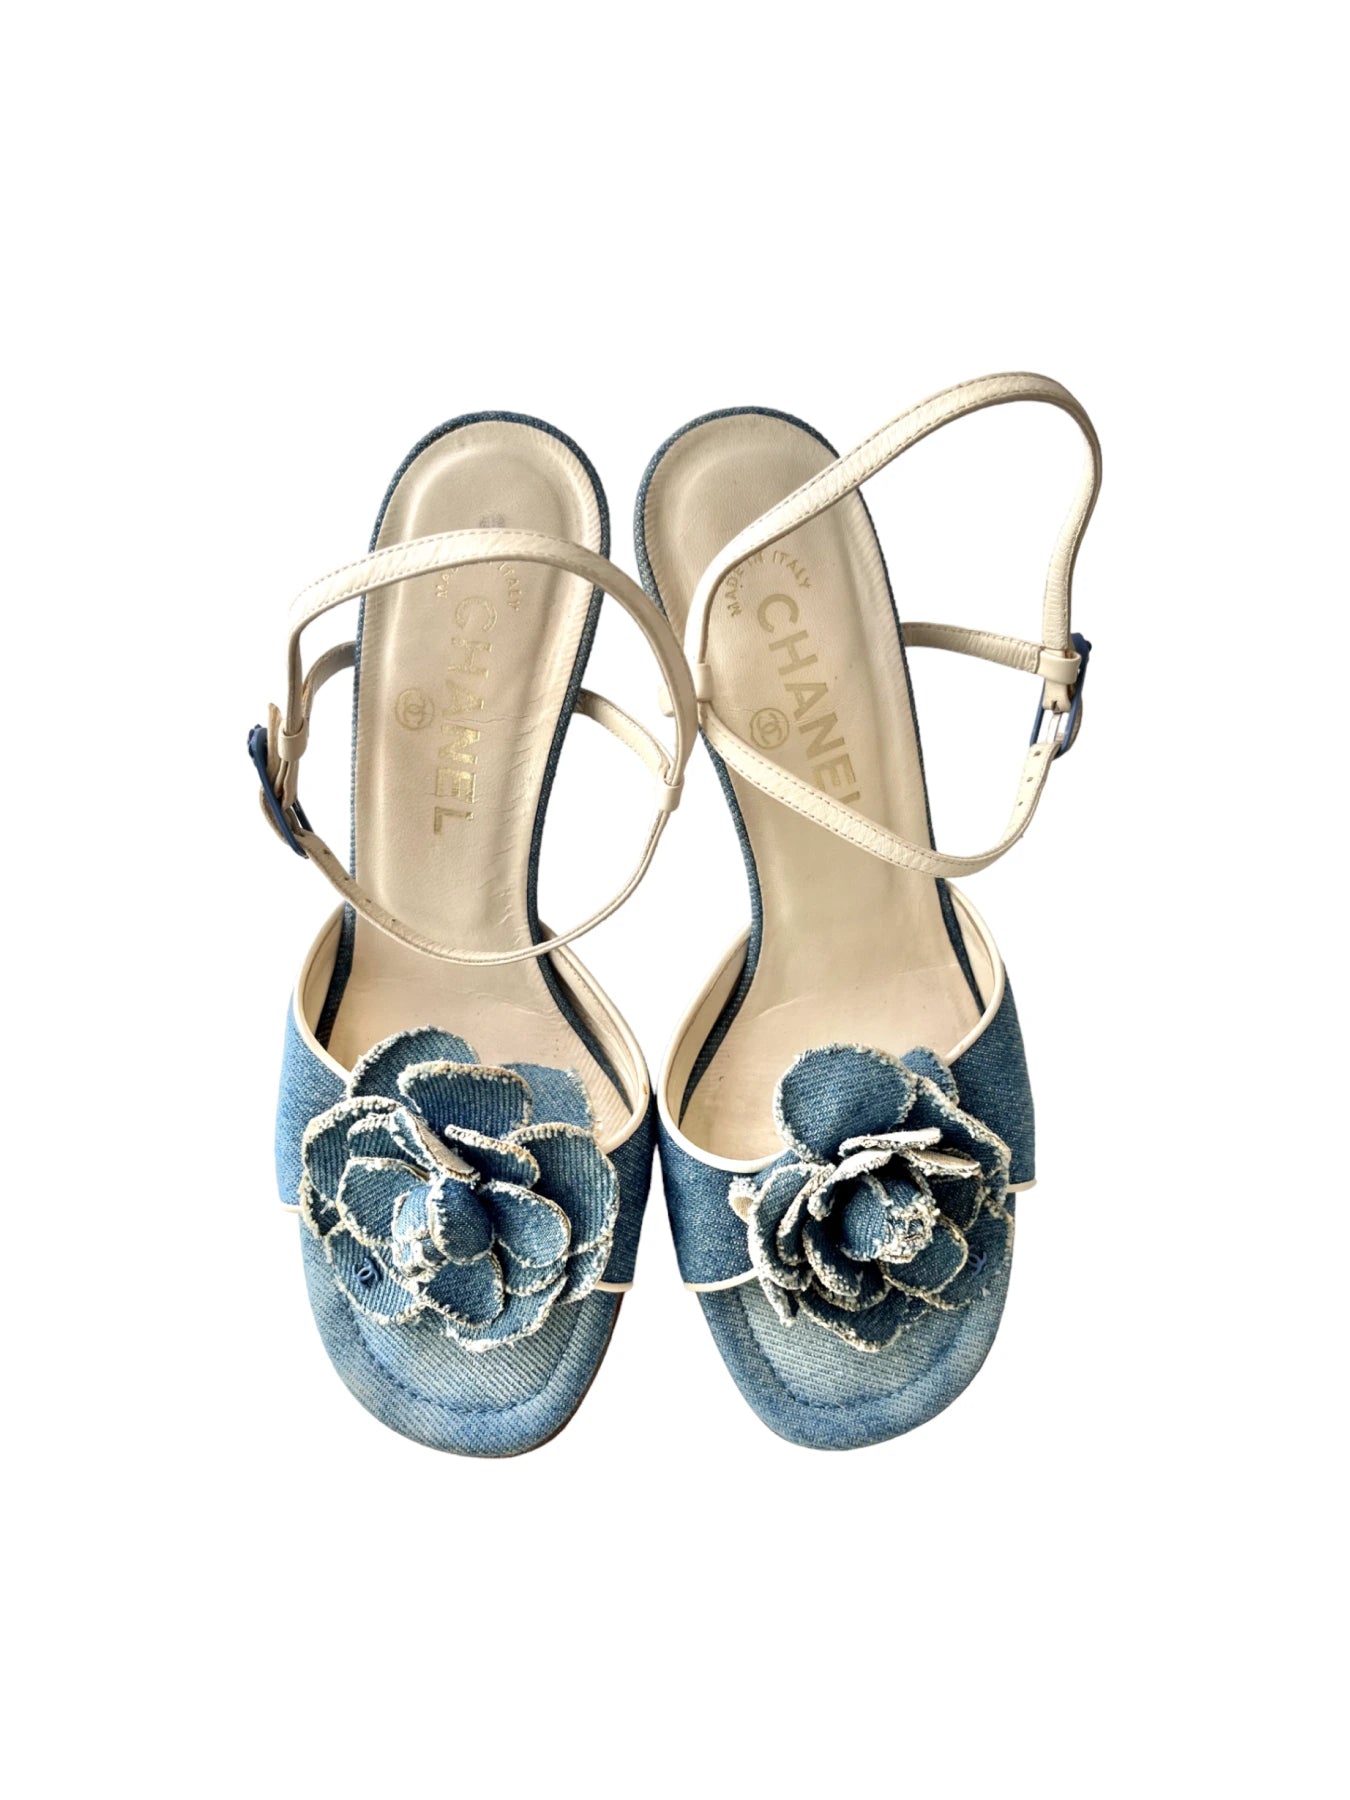 Chanel Denim Camellia Strap Sandals Heels, 37.5 | Archive Square The millennial decorator vintage mules Chanel mules Bow Mules Matilda Djerf